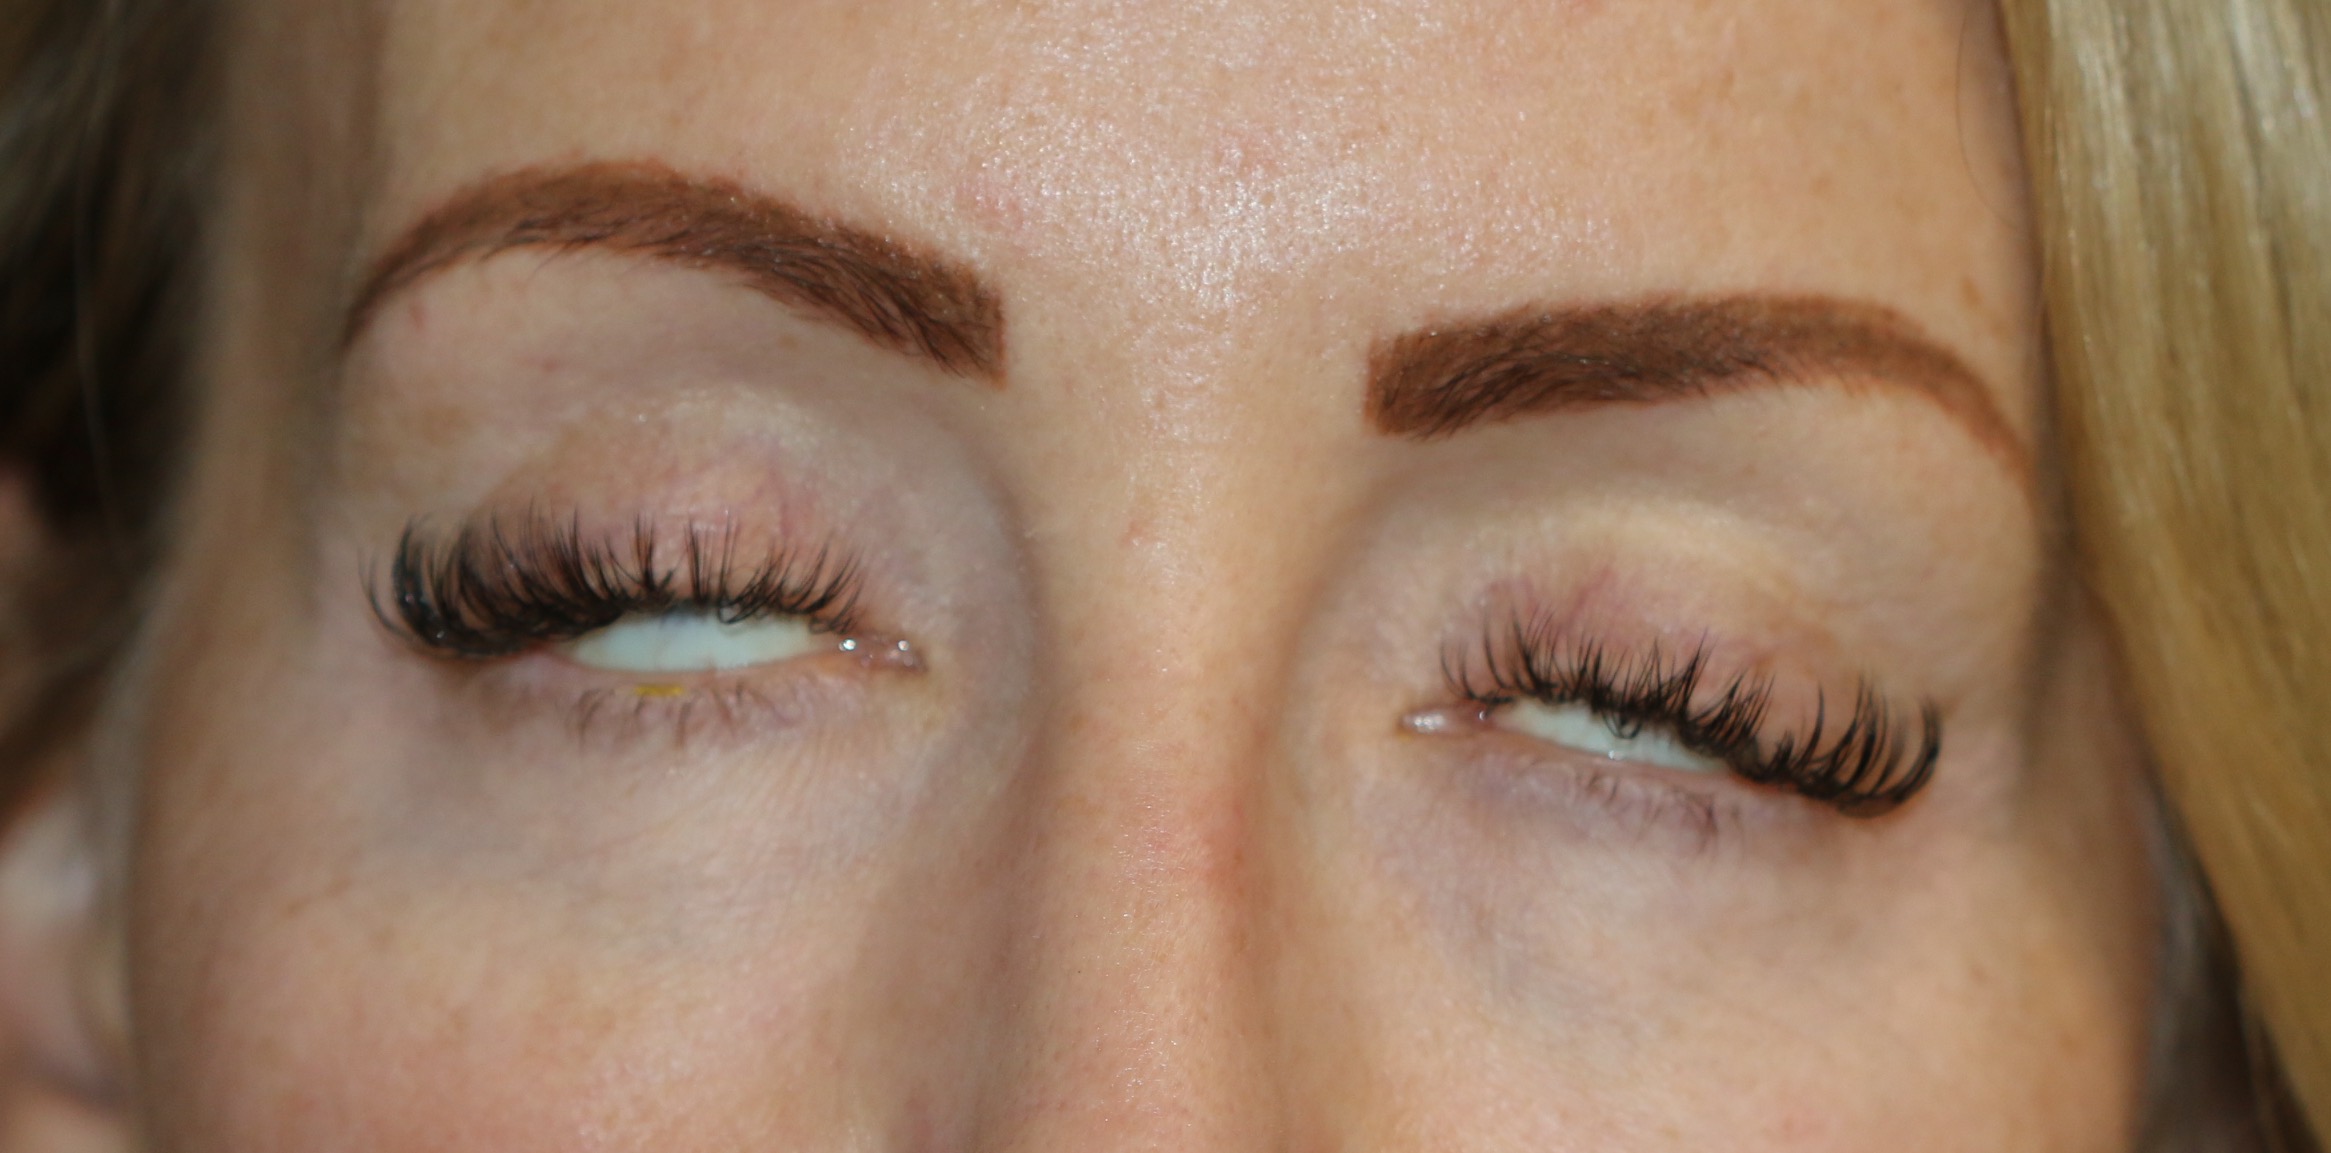 Bilateral lagophthalmos one year after upper blepharoplasty Right lagophthalmos measures 2